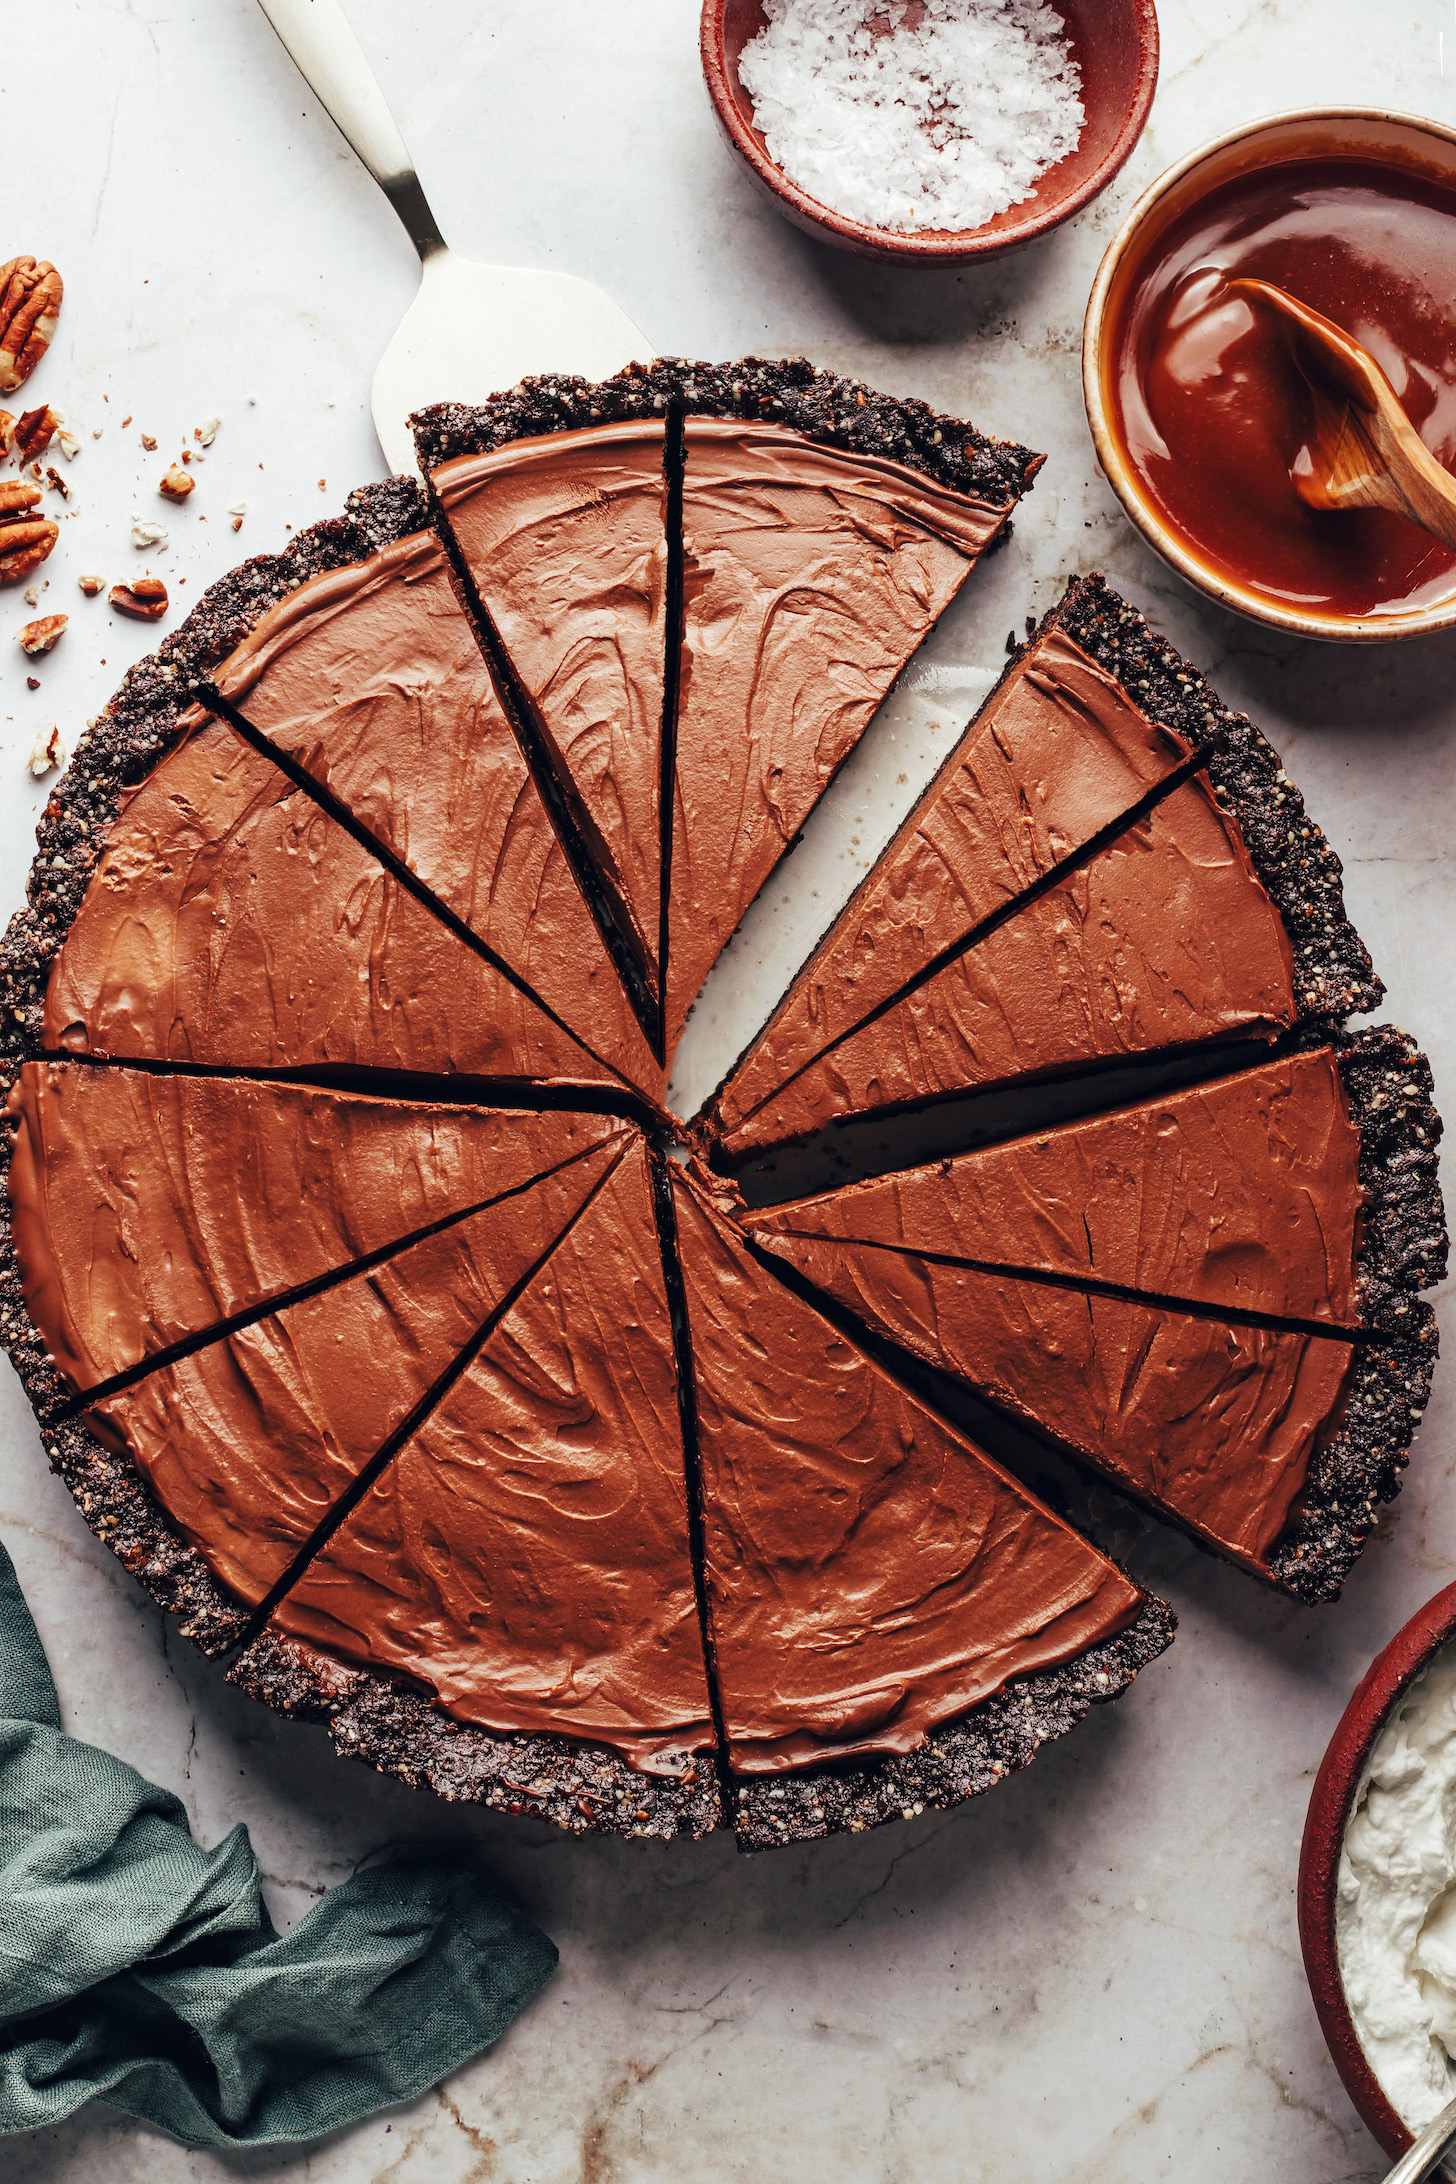 Slices of our no-bake double chocolate mousse pie surrounded by ingredients for topping